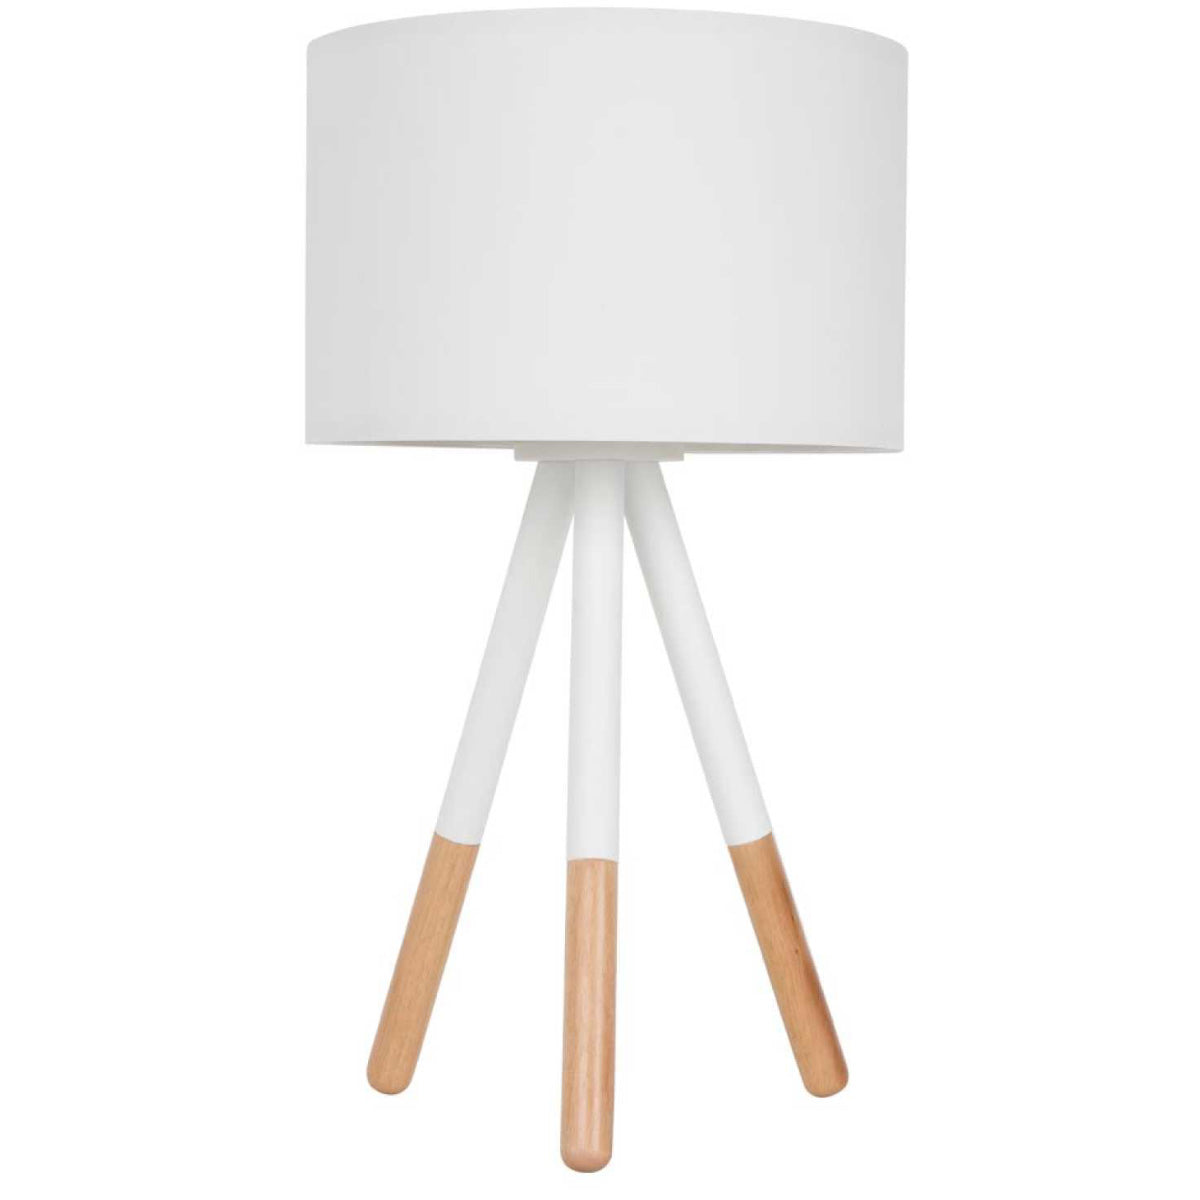 Highland White Table Lamp (Discontinued Model)